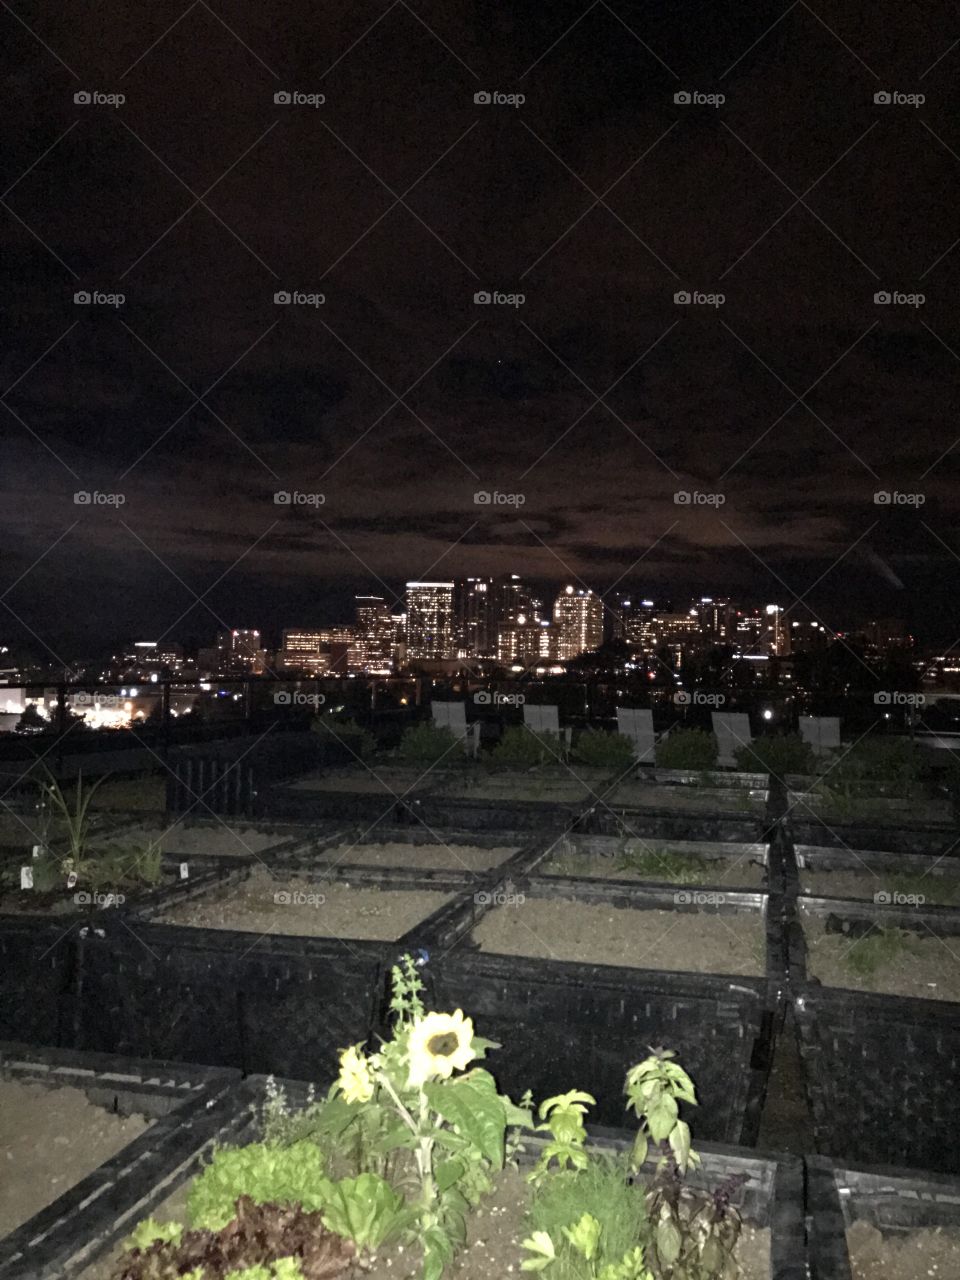 Garden atop of apartment building over looking Bellevue, Washington. Just arrived into Washington quick stop before heading out to the Casinos and onto the river 